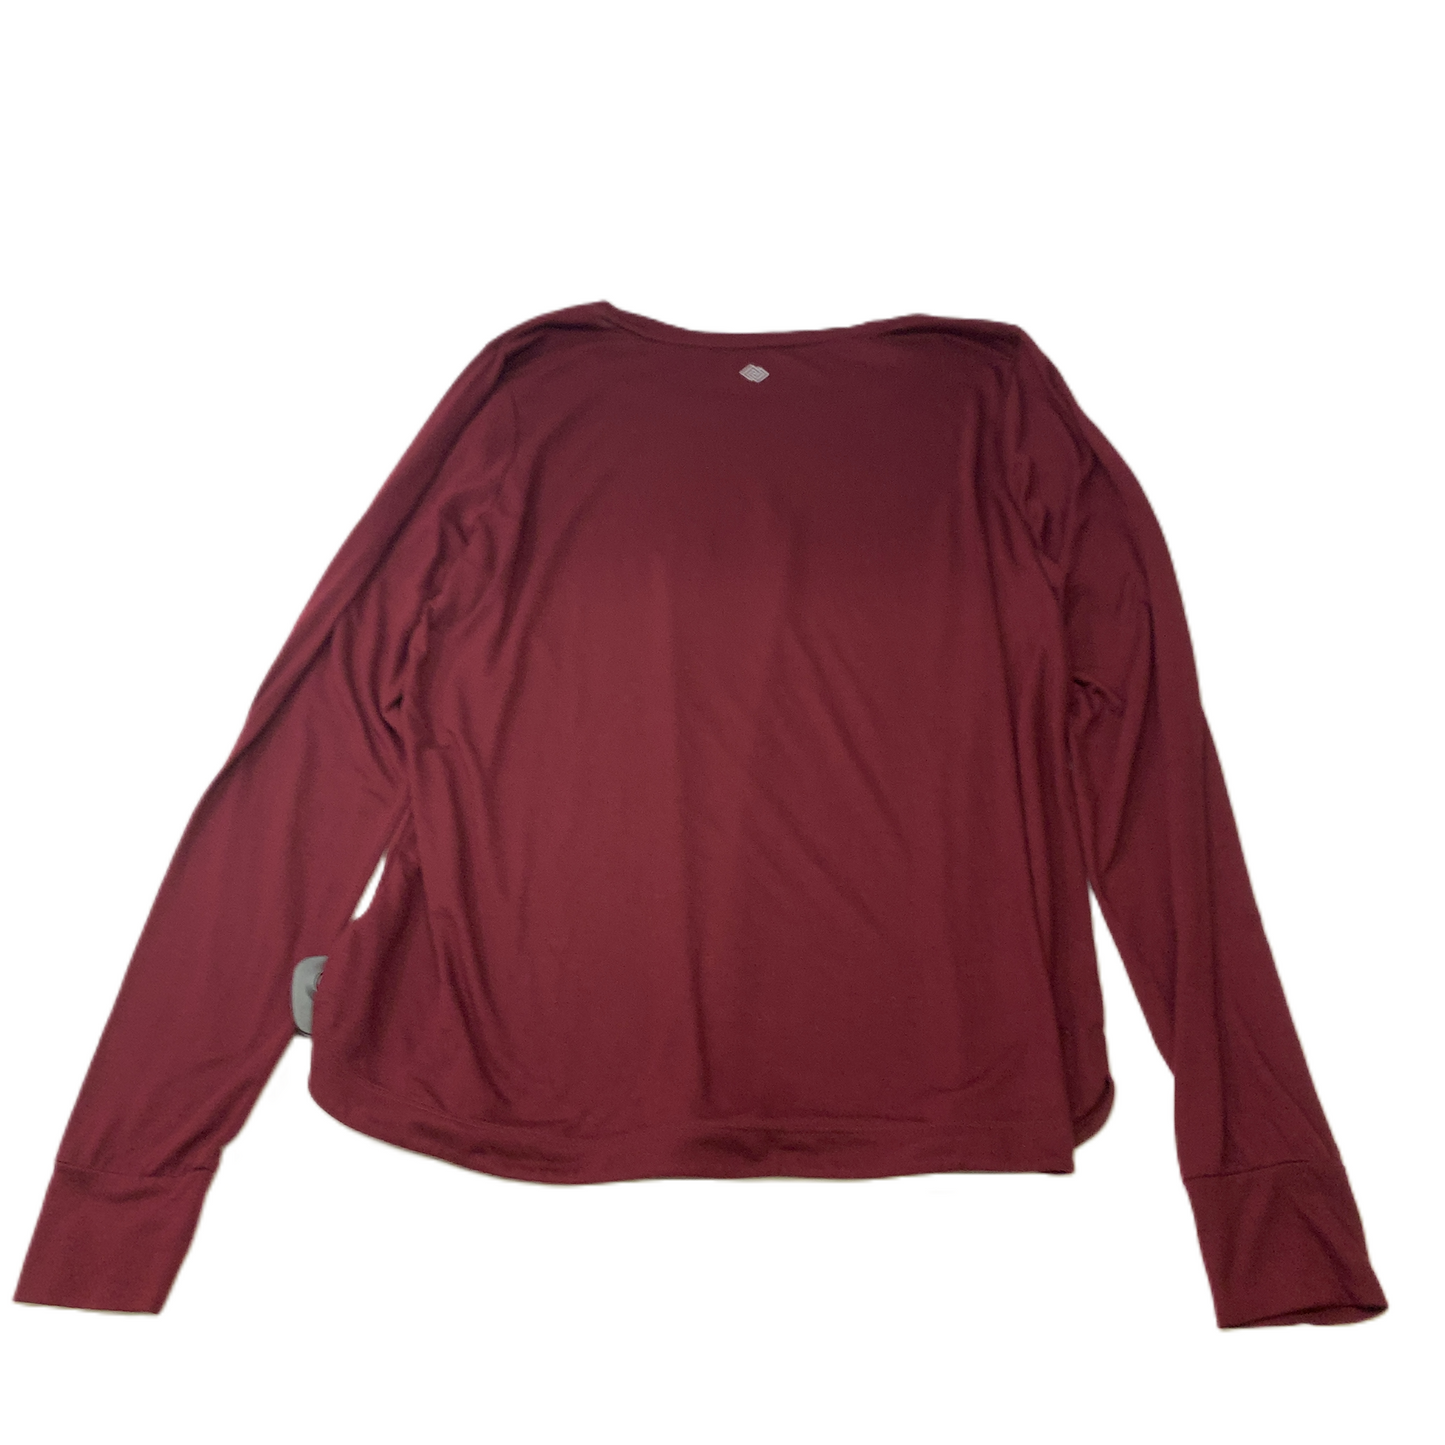 Athletic Top Long Sleeve Crewneck By Zelos  Size: 1x